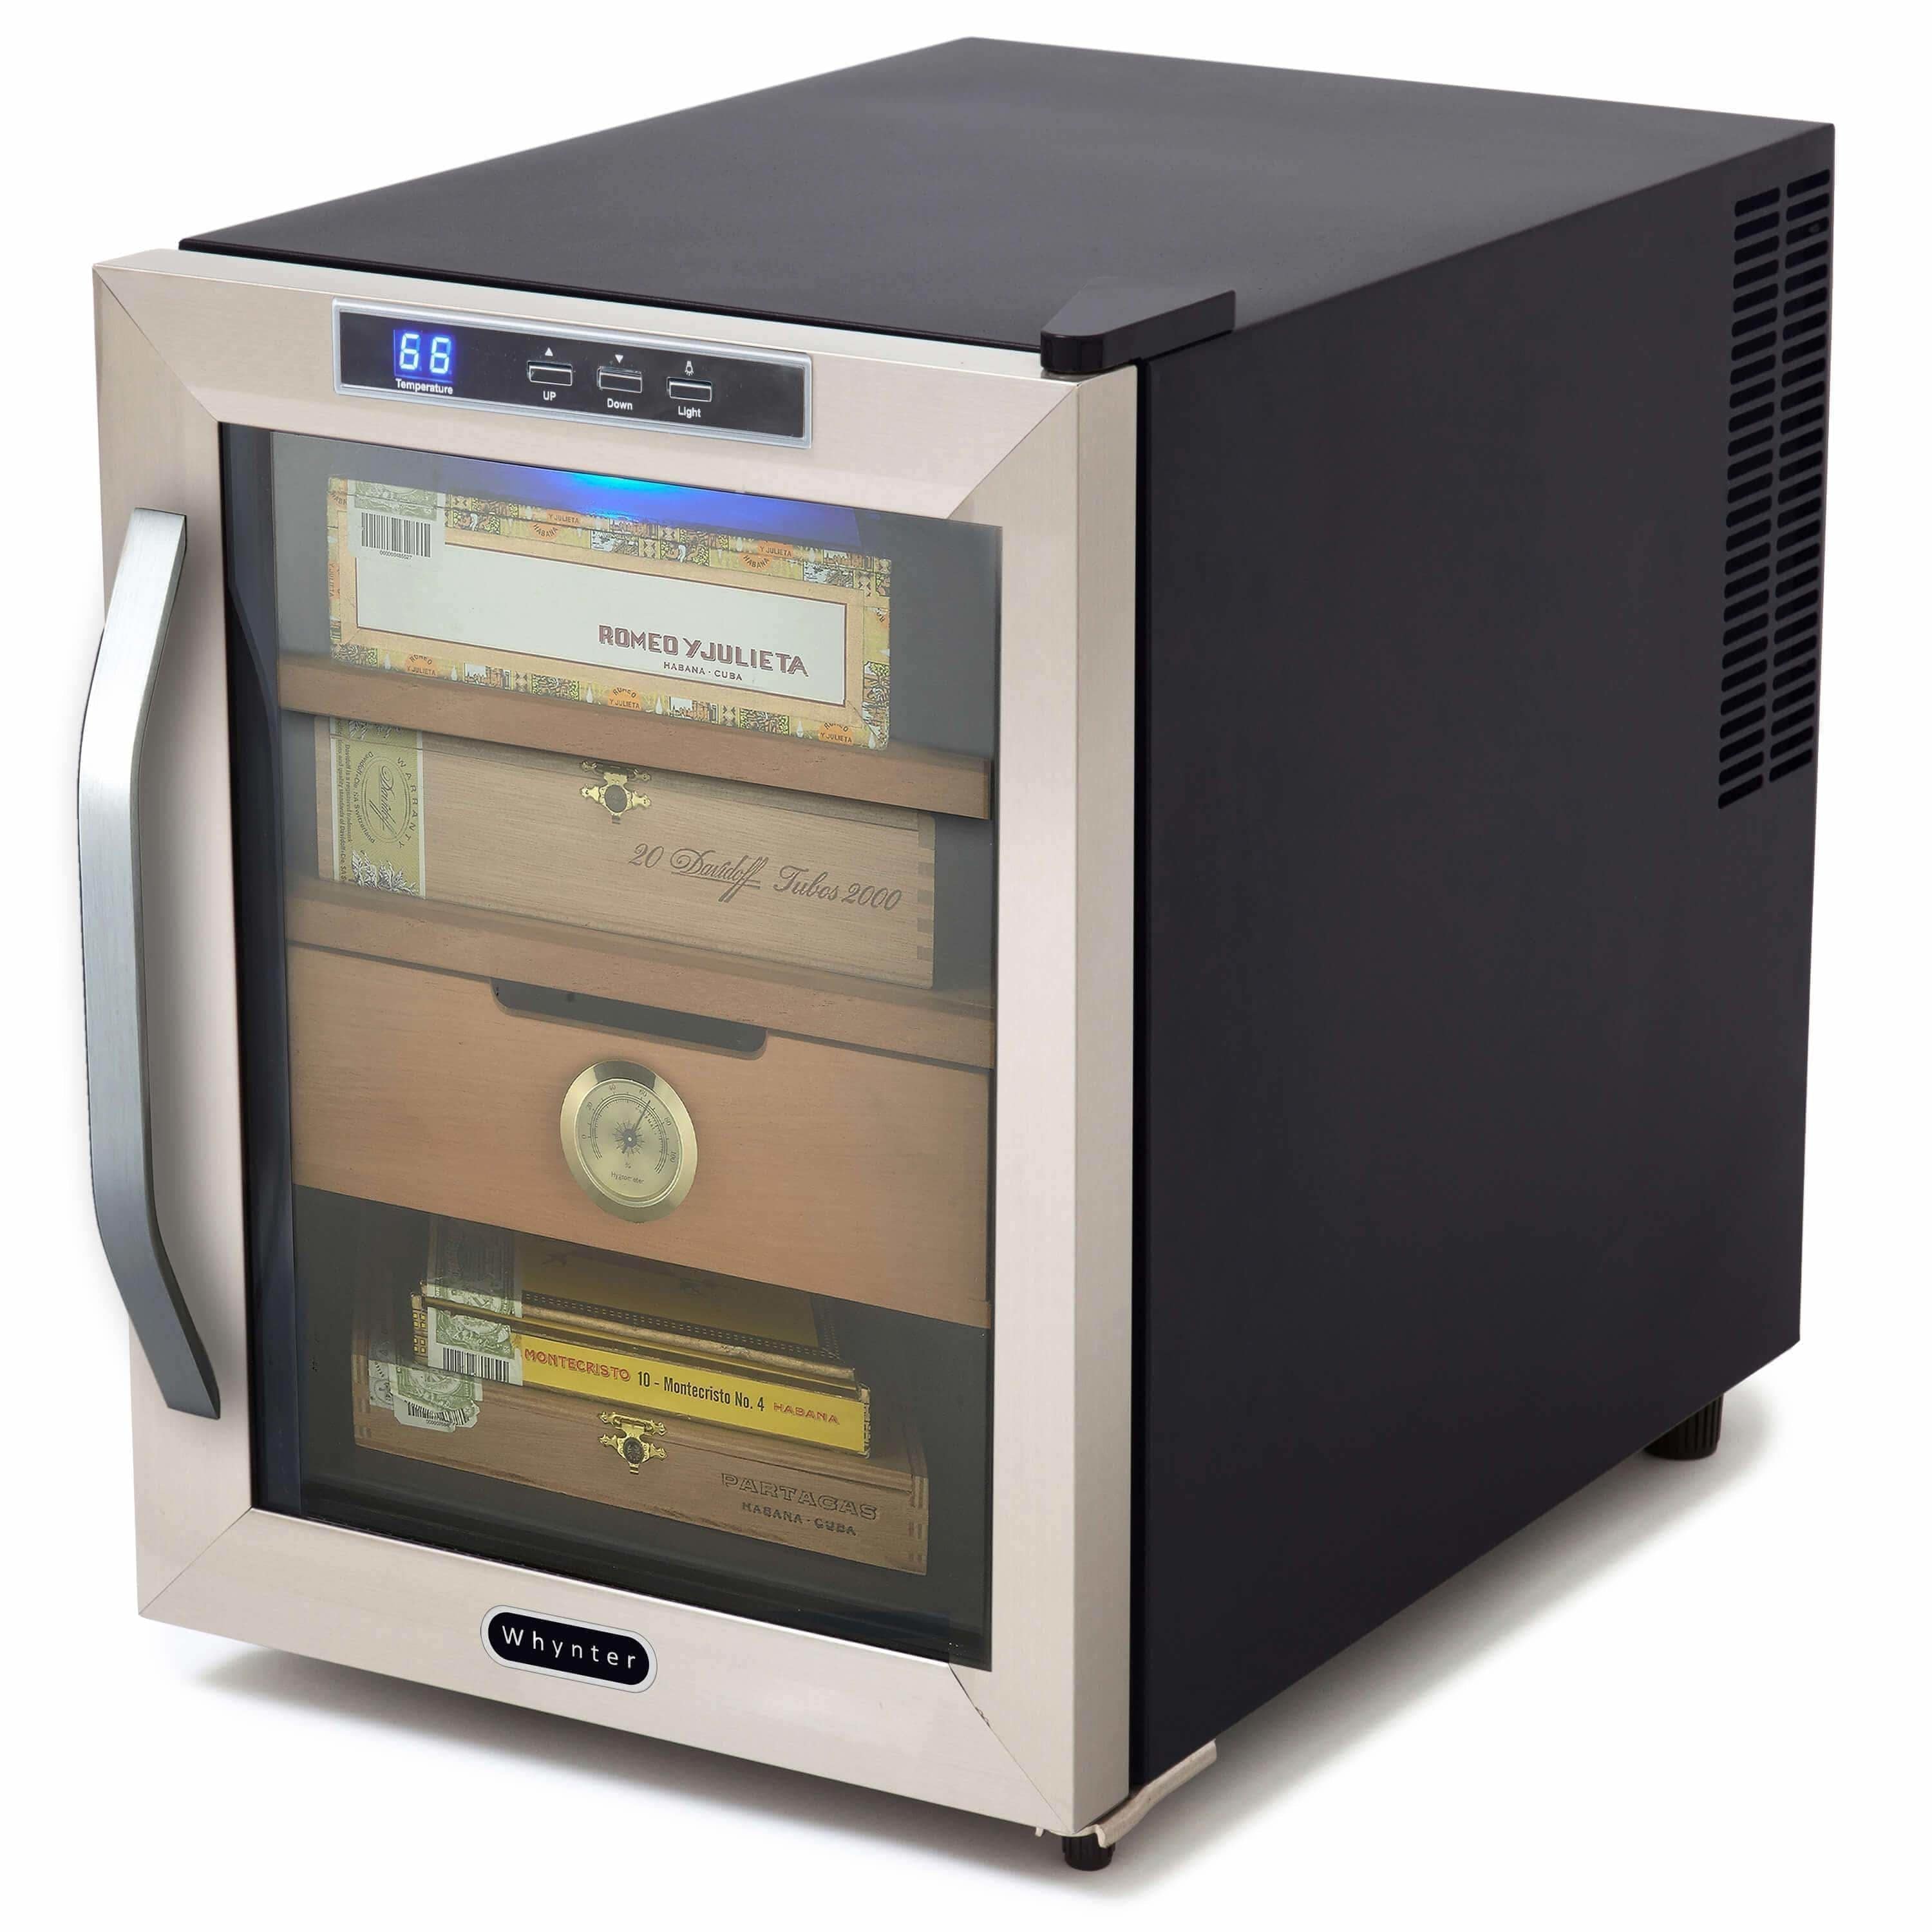 Whynter Stainless Steel 1.2 cu. ft. Cigar Cooler Humidor CHC-120S Wine Coolers Empire